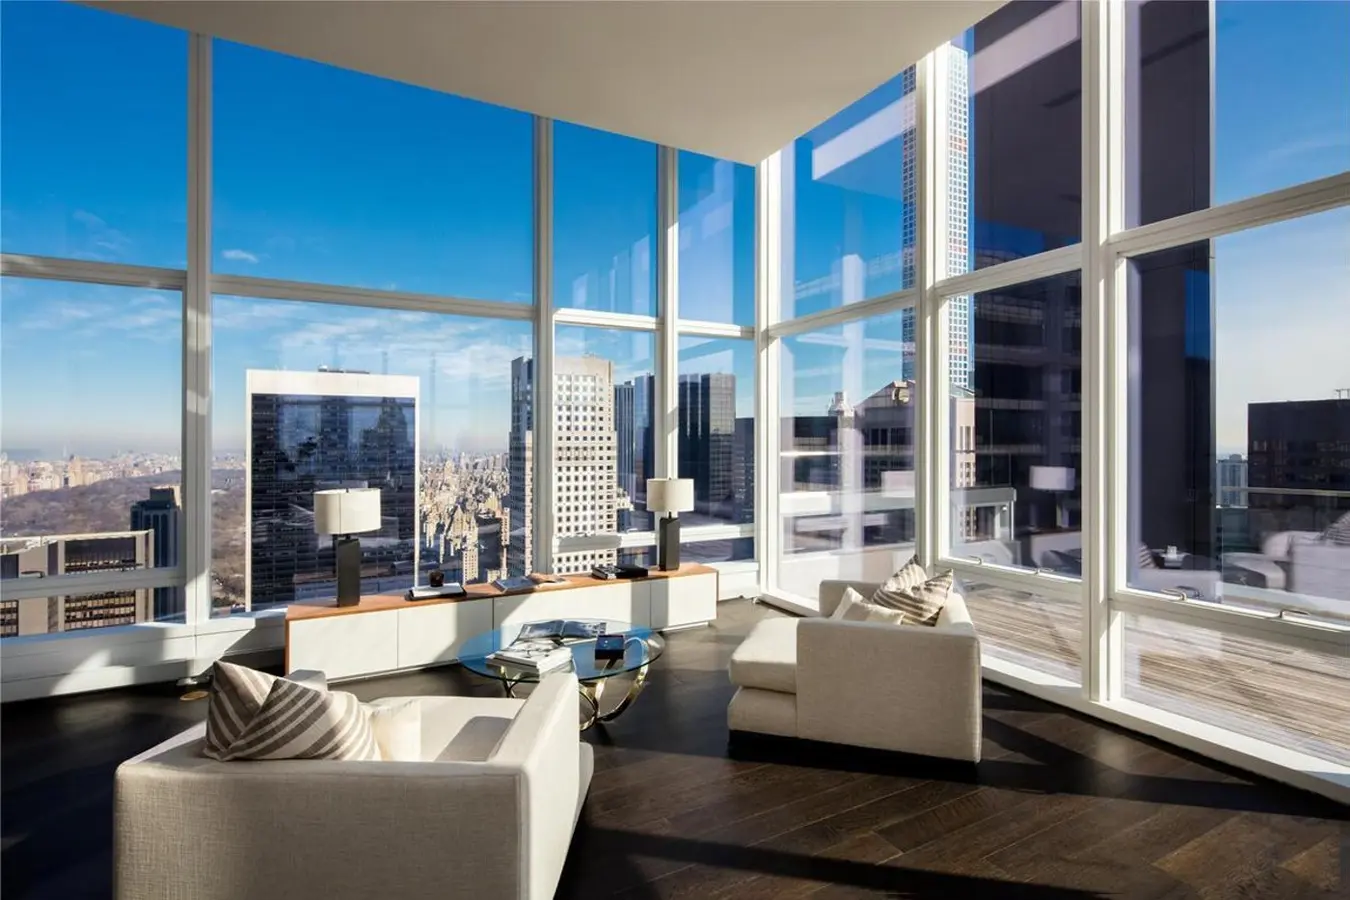 Baccarat Hotel & Residences, 20 West 53rd Street